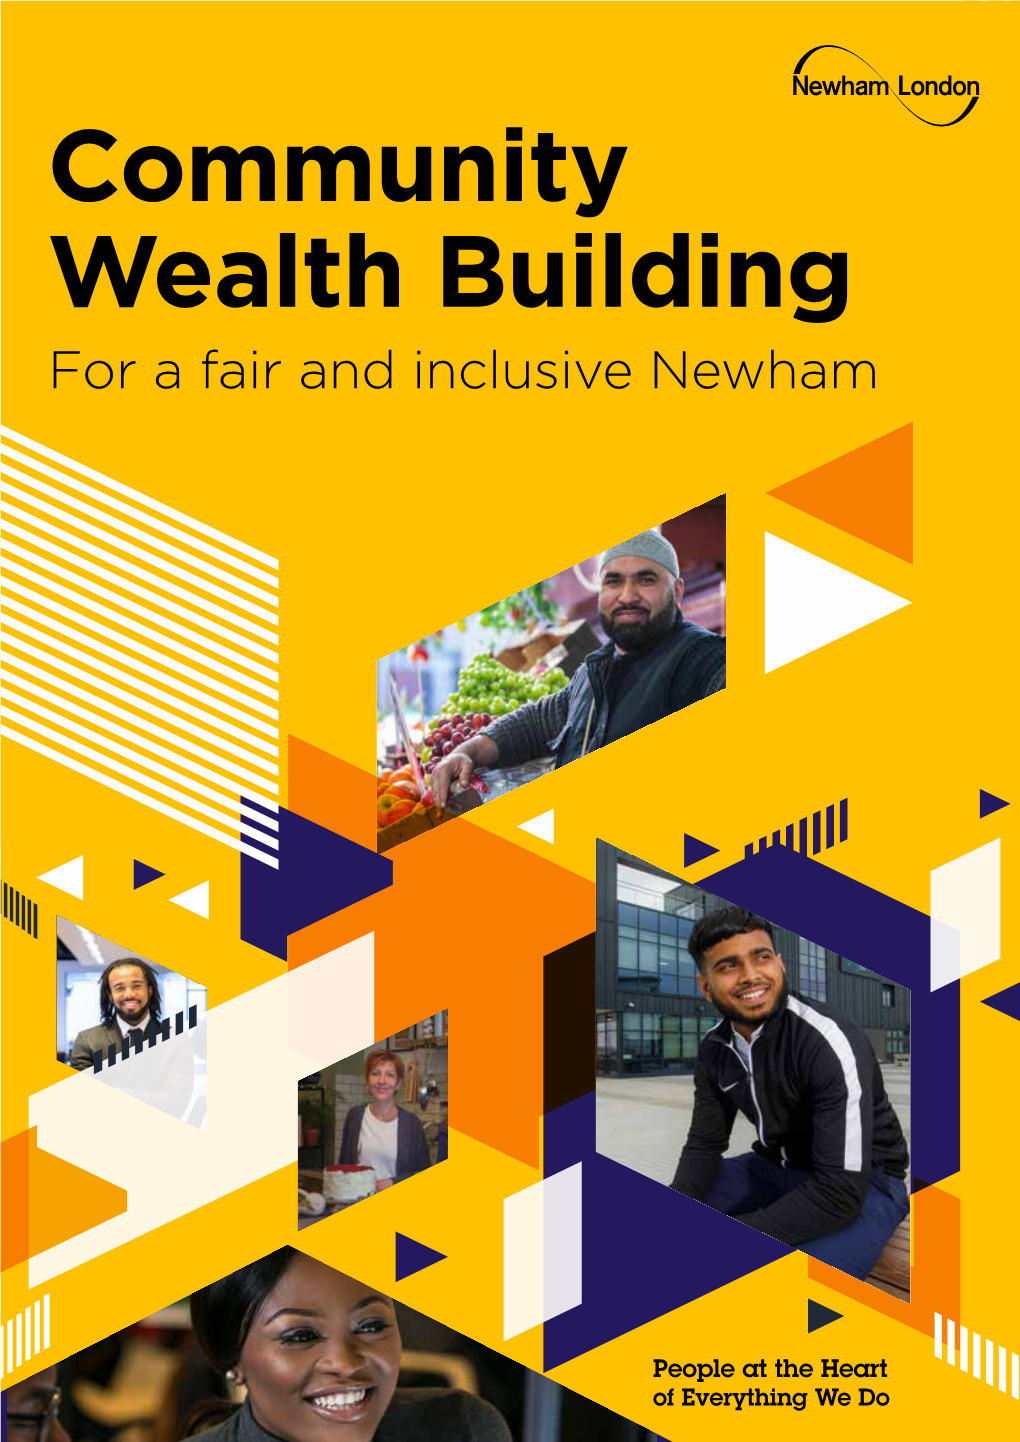 Community Wealth Building Strategy Sets out the Bold Vision with Which We Will Tackle the Rokhsana Fiaz Injustices Our Residents Face